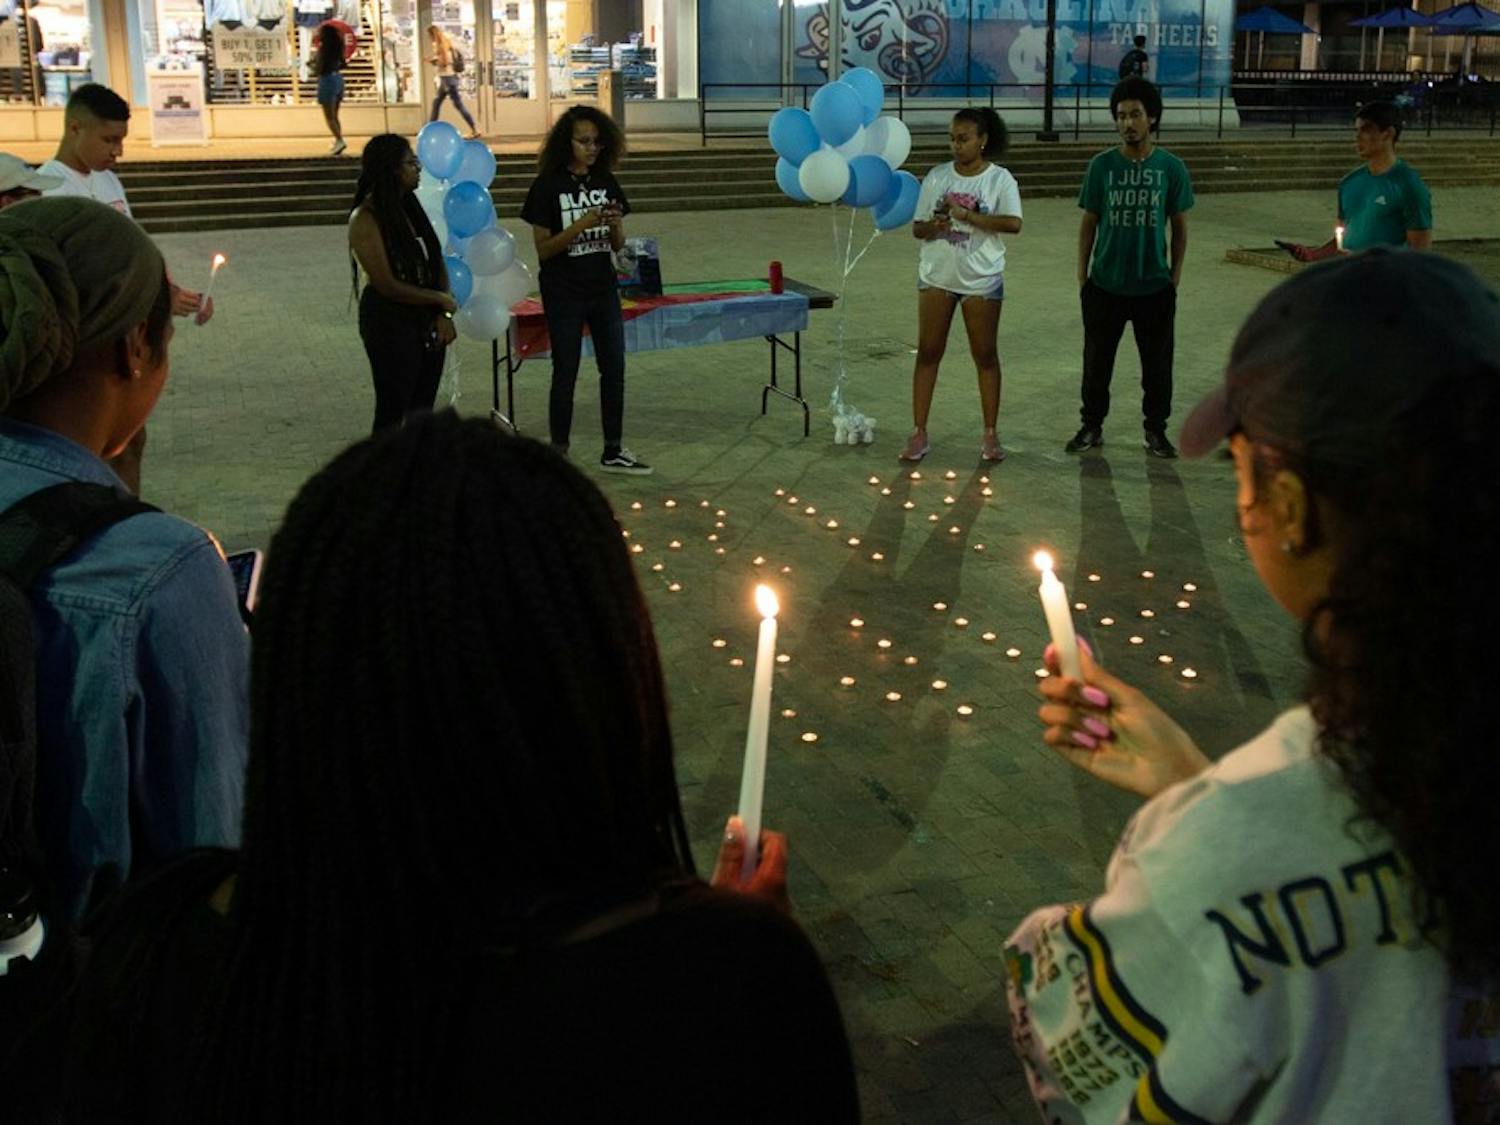 The Young Ethiopian Eritrean Tribe hosted a vigil commemorating the life of Eritrean American rapper Nipsey Hussle, who was shot outside of his clothing store in Los Angeles. The vigil took place on Wednesday, April 10, 2019 in the Pit. Members held candles and shared poems, art and words with one another about the rapper's death and legacy.